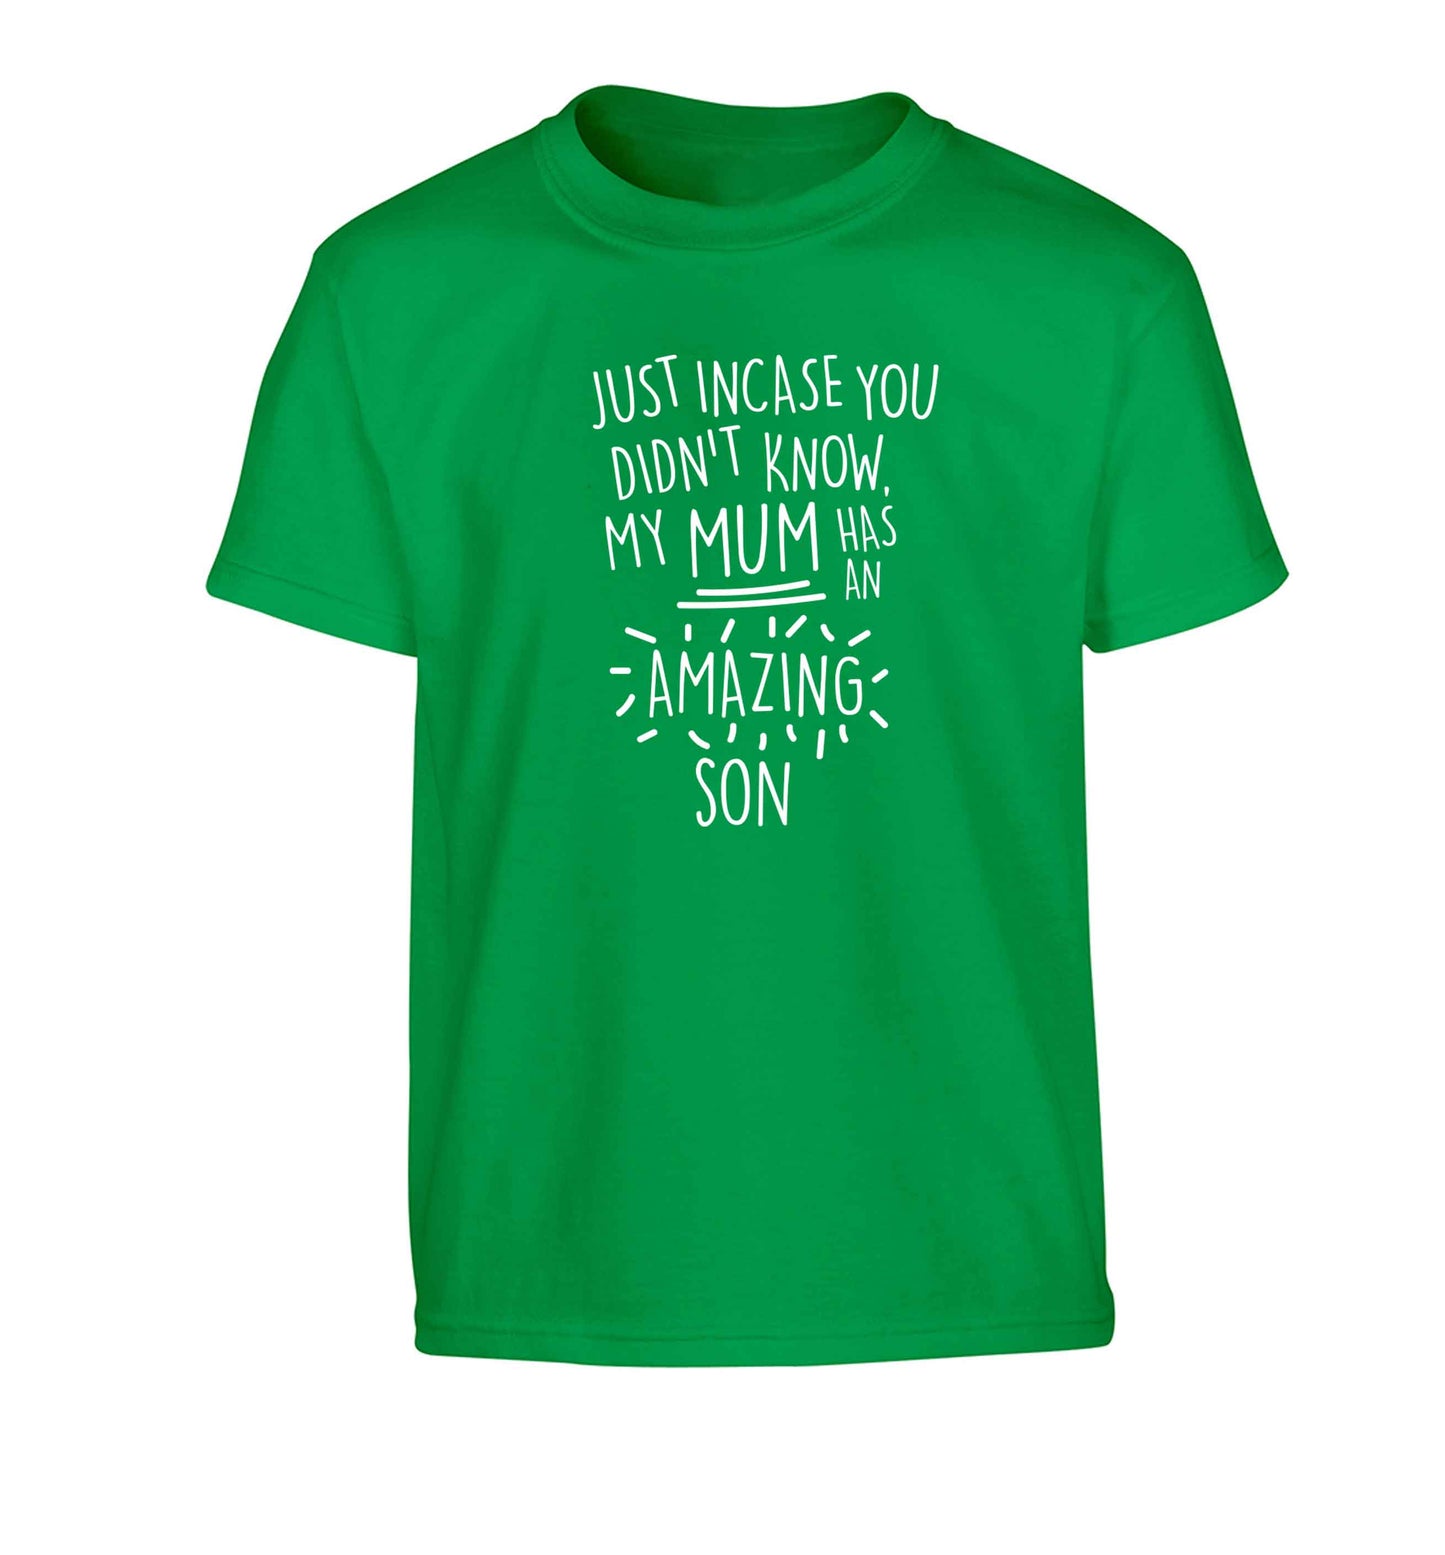 Just incase you didn't know my mum has an amazing son Children's green Tshirt 12-13 Years